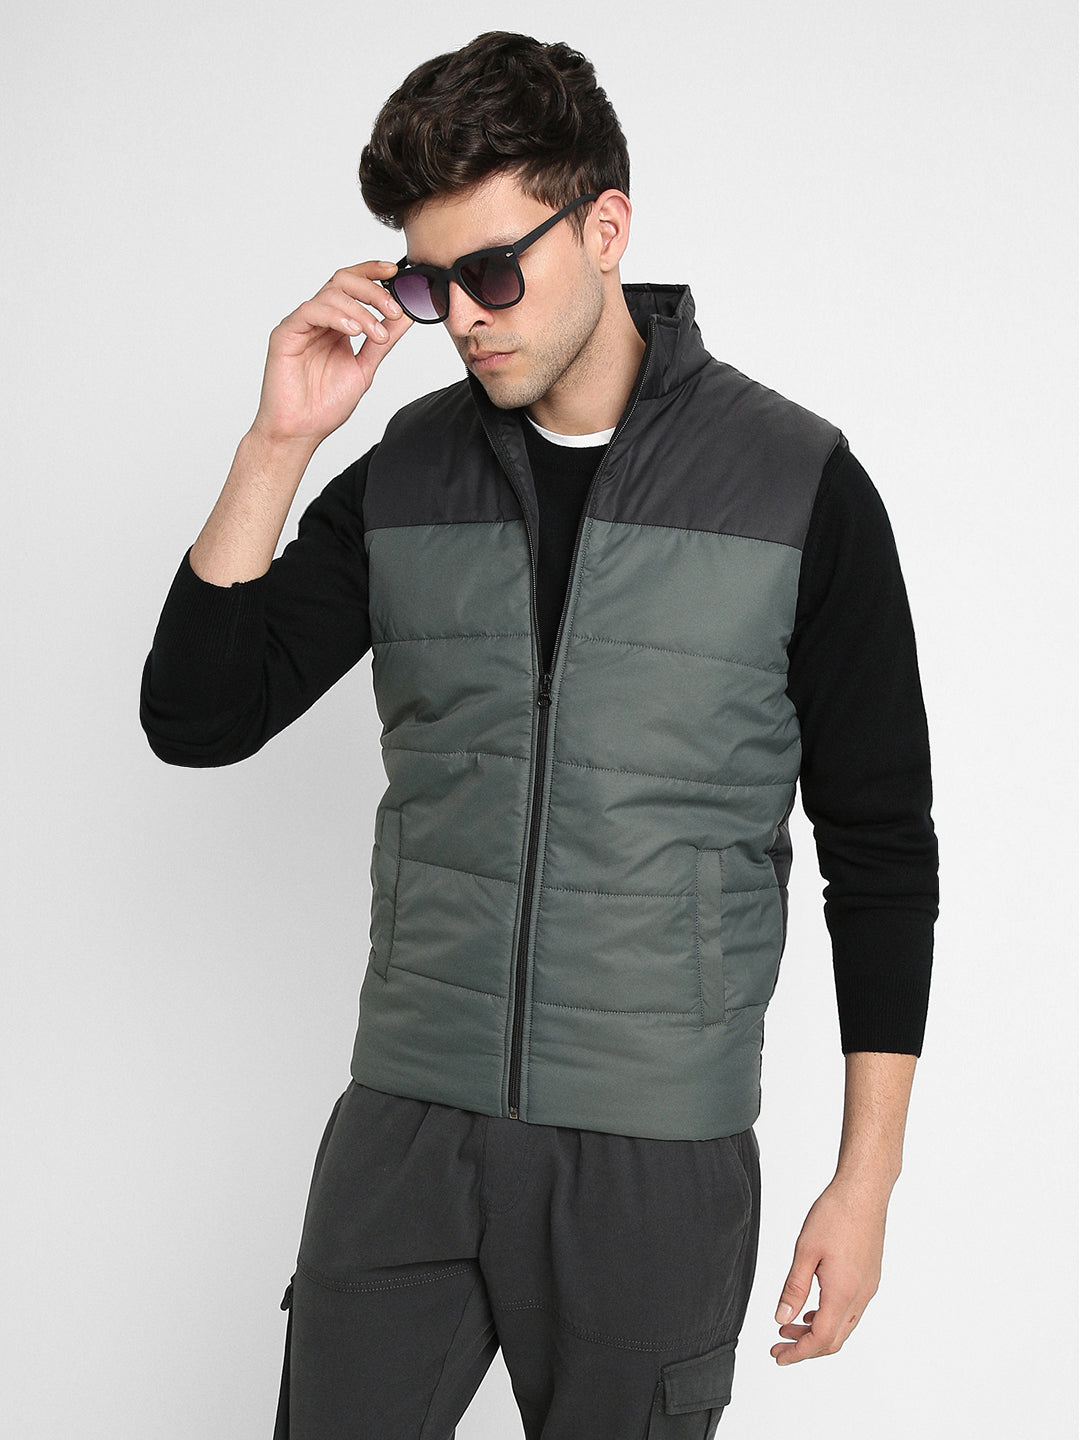 Dennis Lingo Men's Military Colourblock Quilted High Neck Sleeveless Gillet Jackets